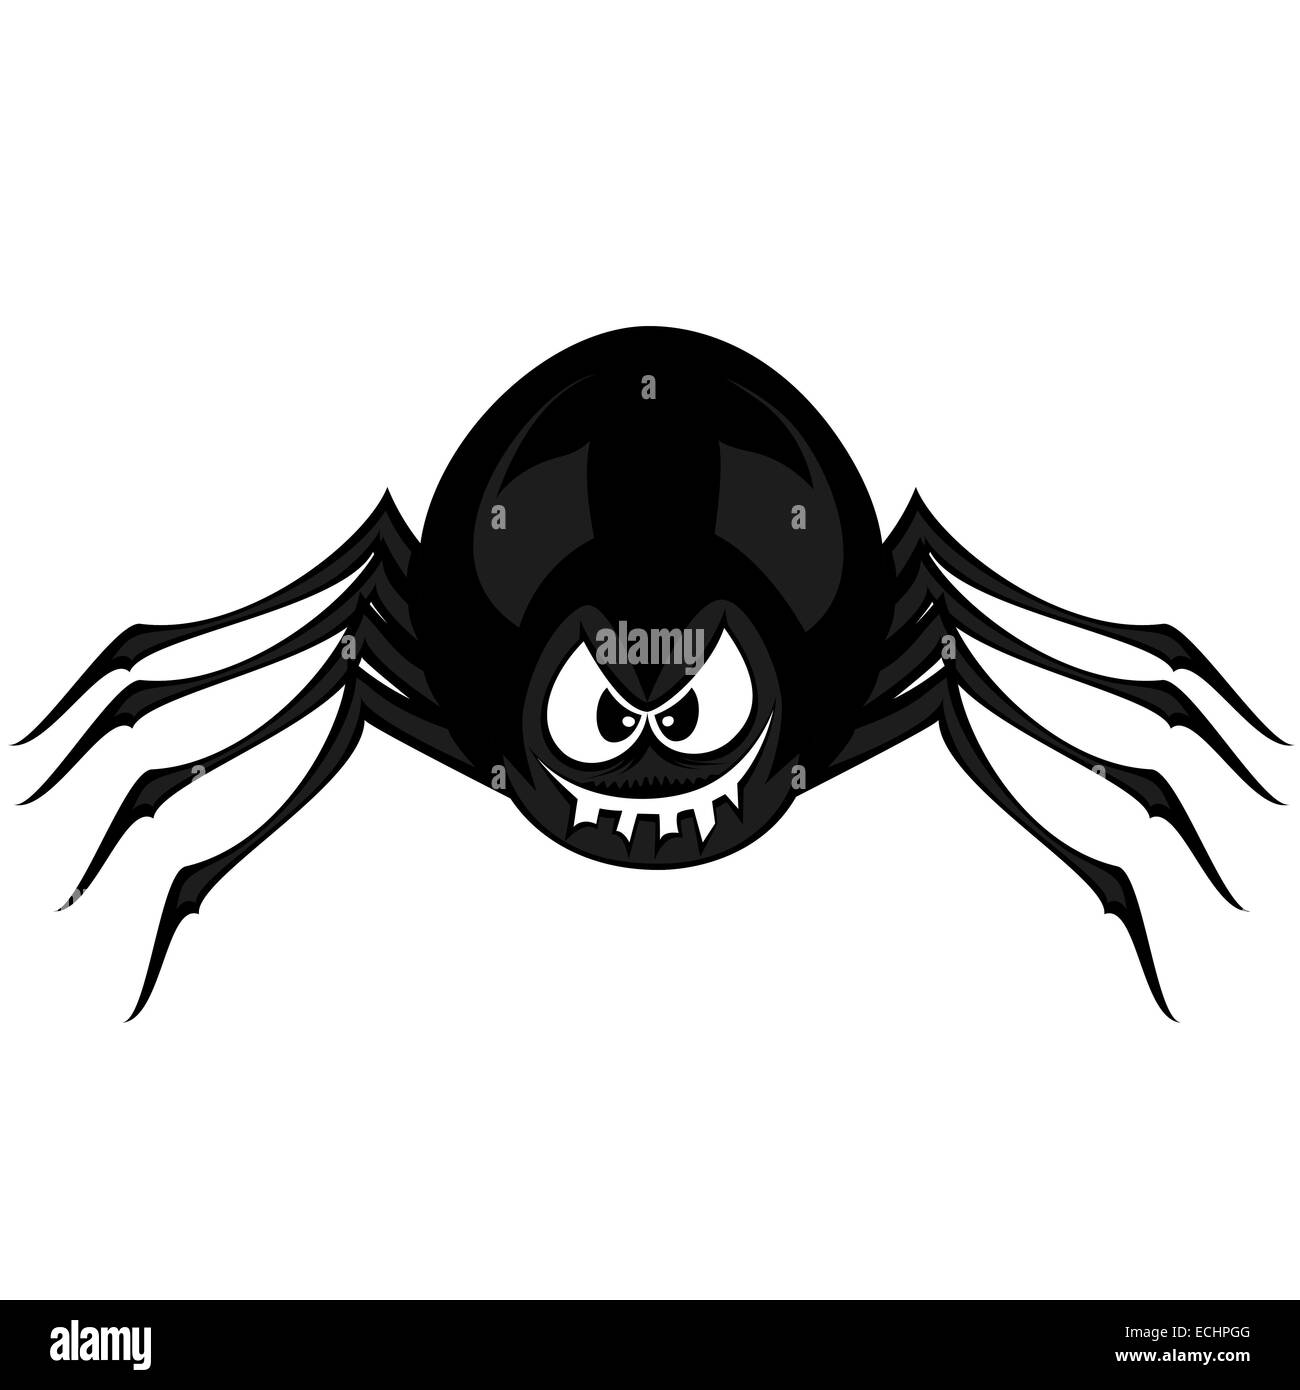 Funny freaky spider - a black cartoon spider smiles and snarls with angry eyes Stock Photo